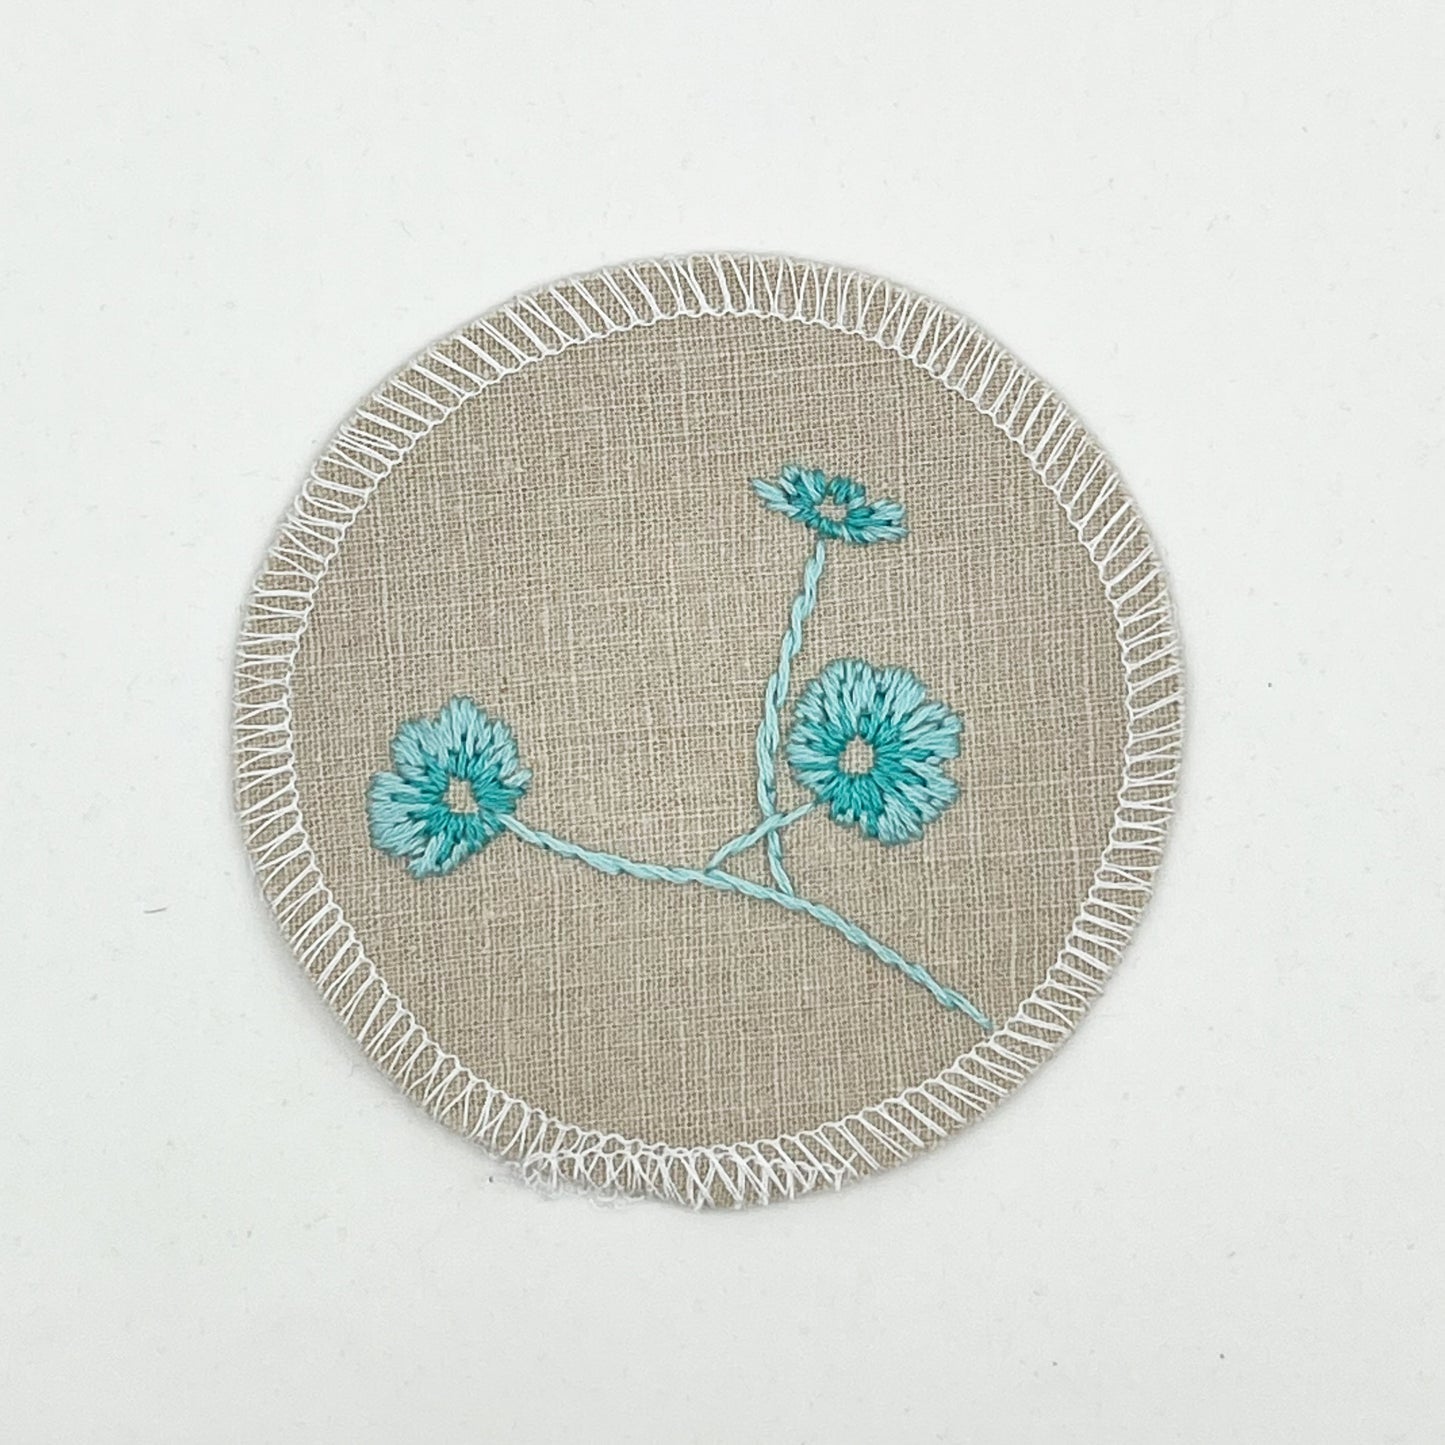 a circle shaped patch made from a natural color linen fabric, hand embroidered with 3 poppies in shades of robin's egg blues, edges overlocked with white thread, on a white background